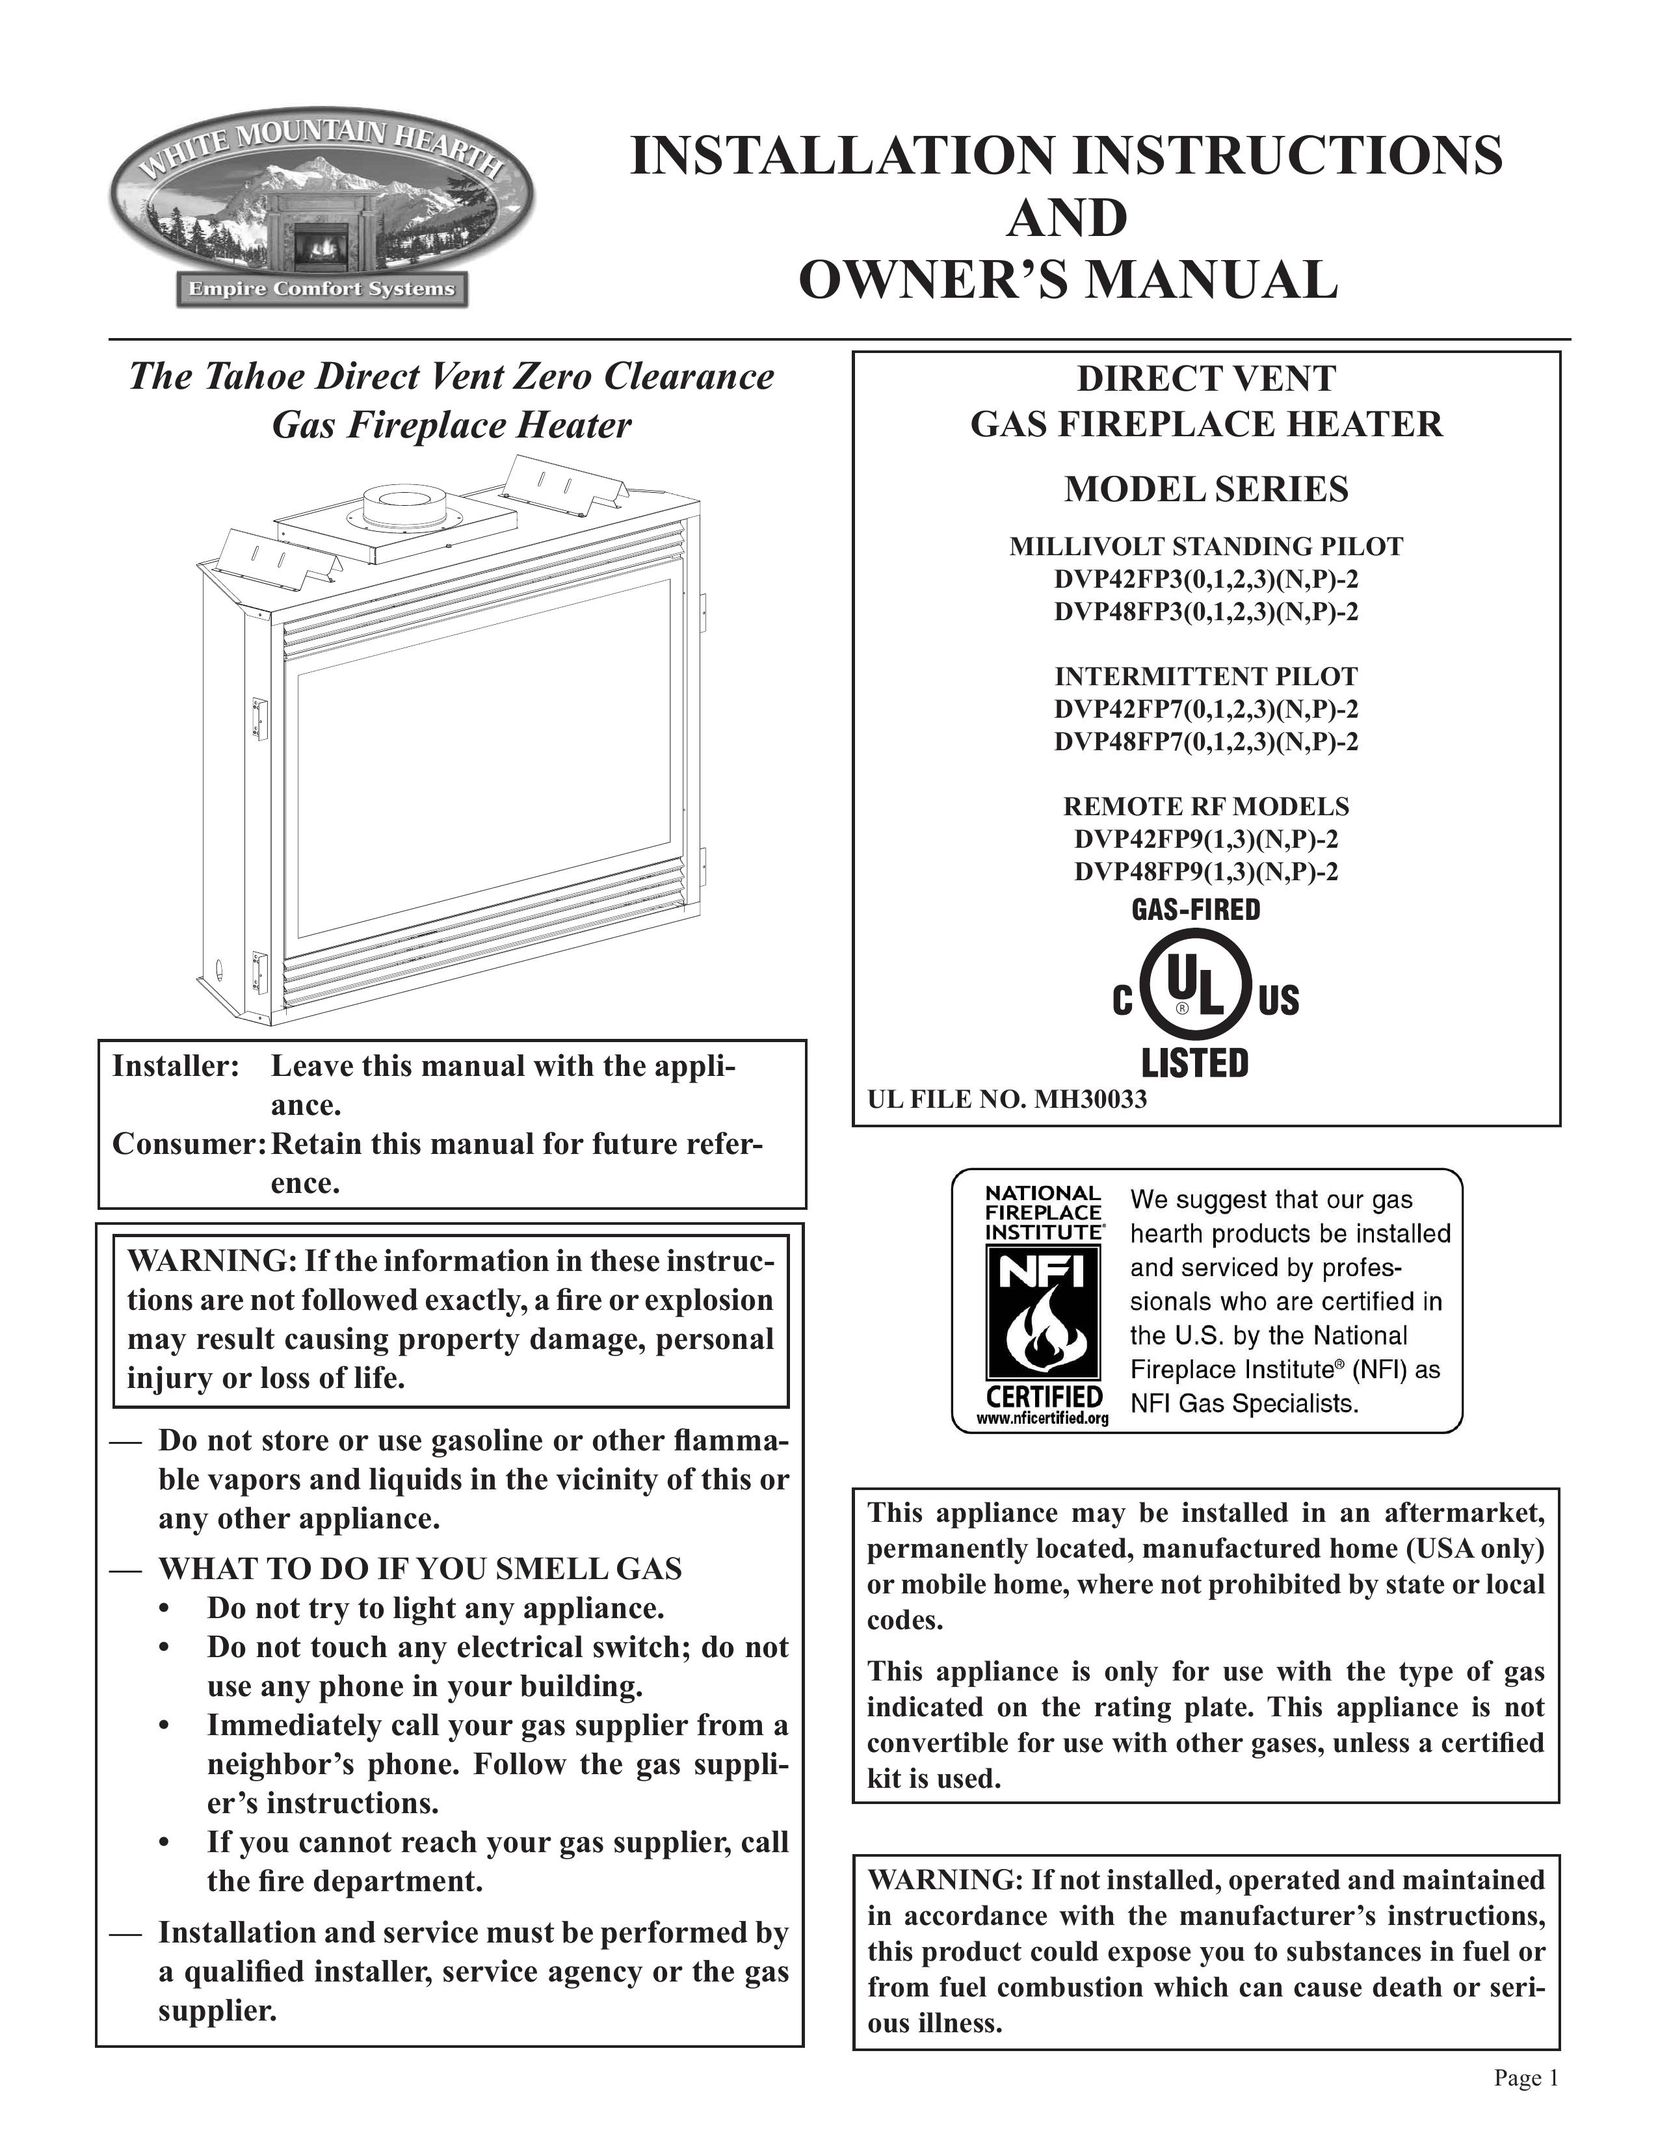 Empire Comfort Systems P)-2 Electric Heater User Manual